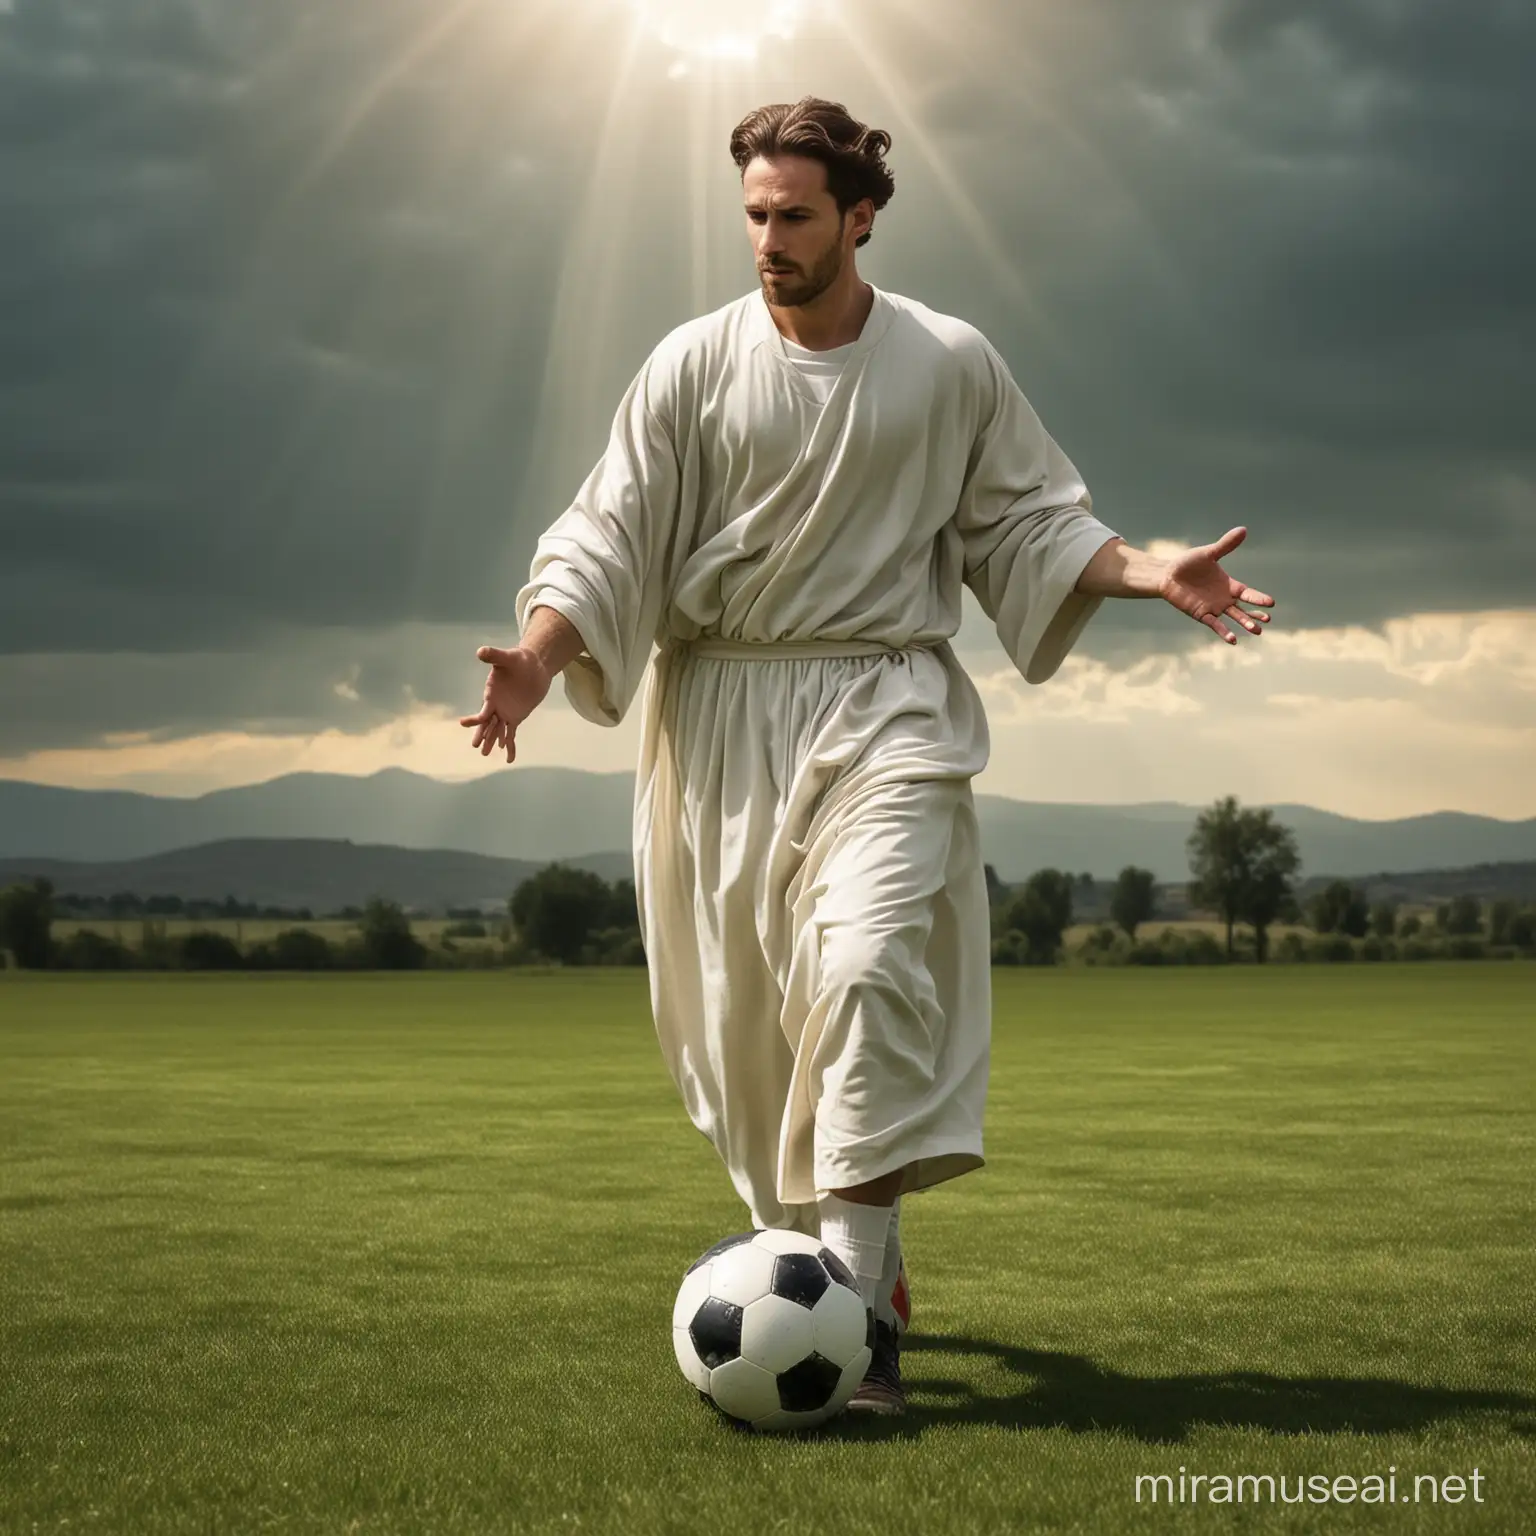 Deity Engaged in Football Game with Mortals